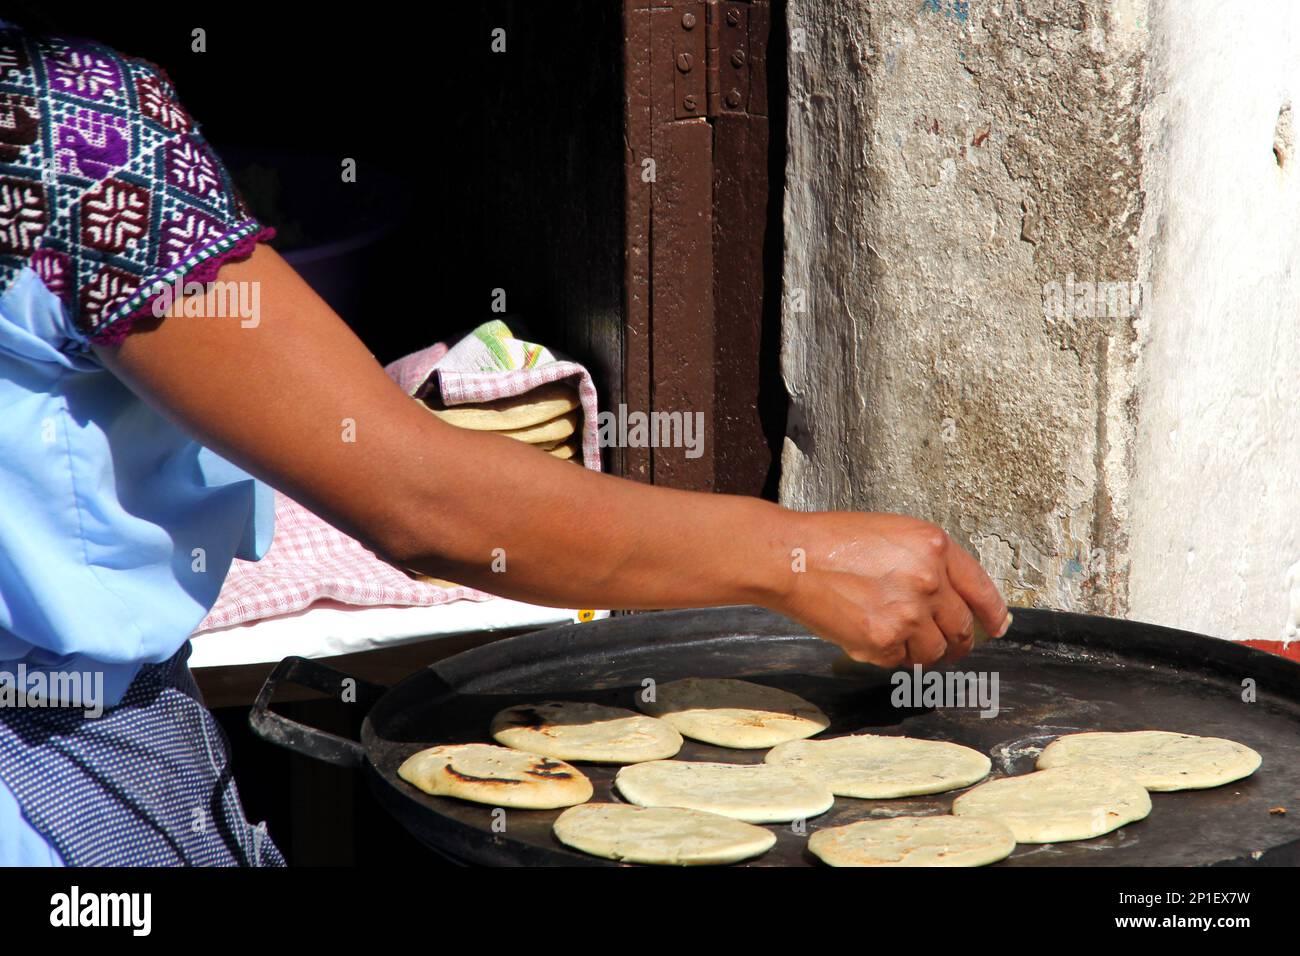 https://c8.alamy.com/comp/2P1EX7W/view-of-female-indigenous-hand-making-tortillas-on-comal-traditional-food-2P1EX7W.jpg